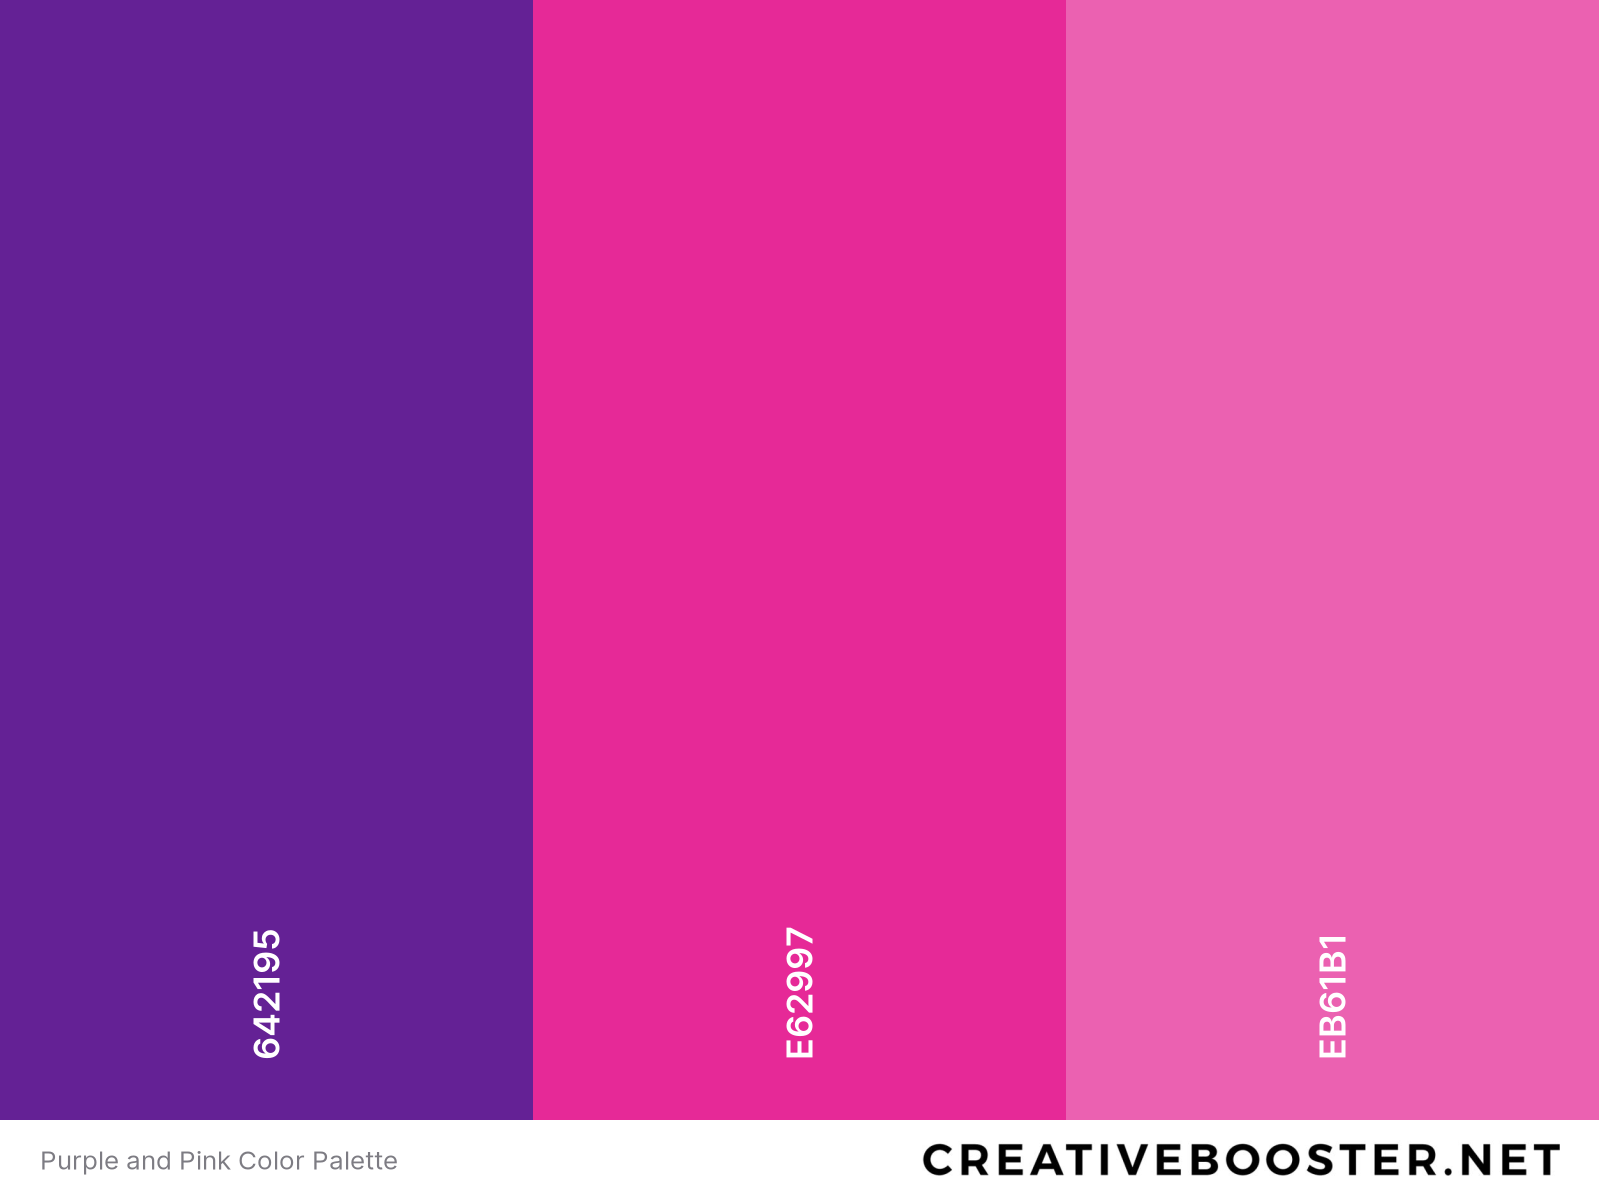 Purple and Pink Color Palette